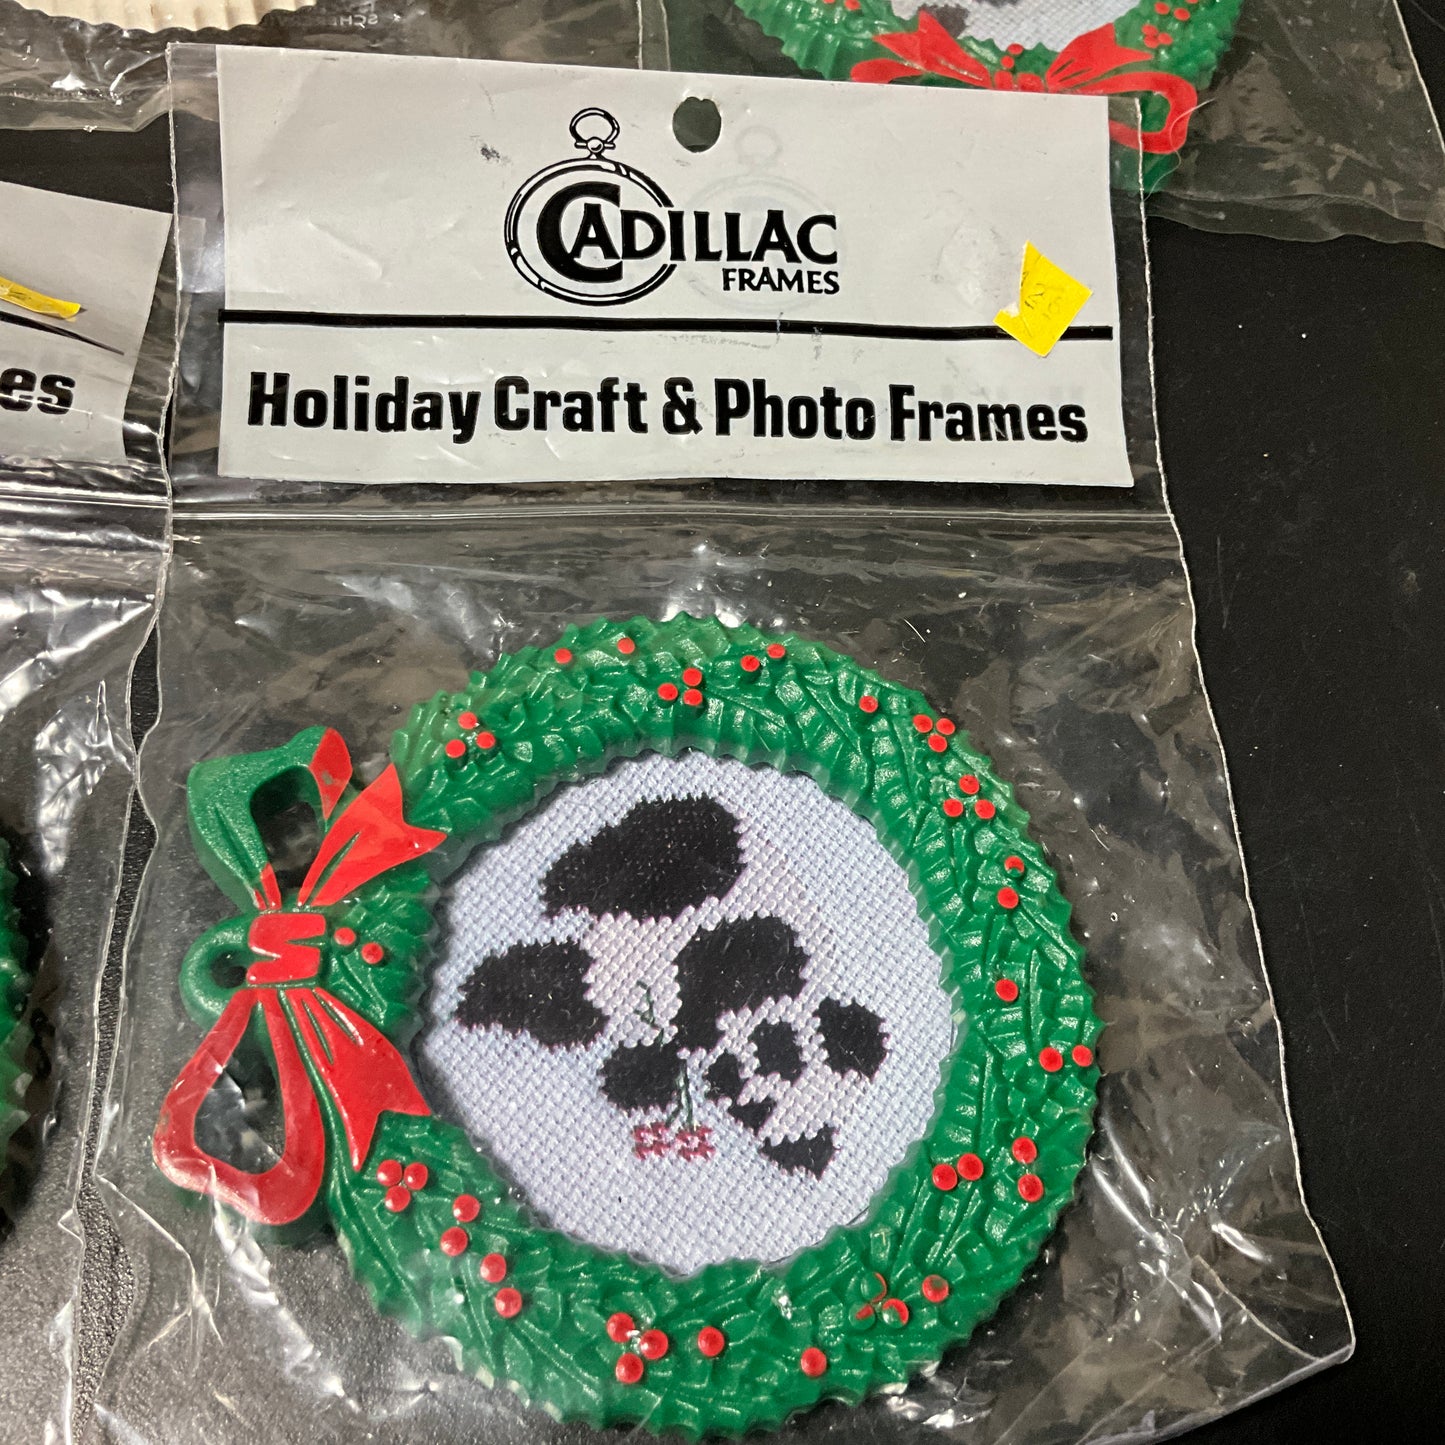 Cadillac Holiday Craft & Photo Frames 2.25 inch choice see pictures and variations*